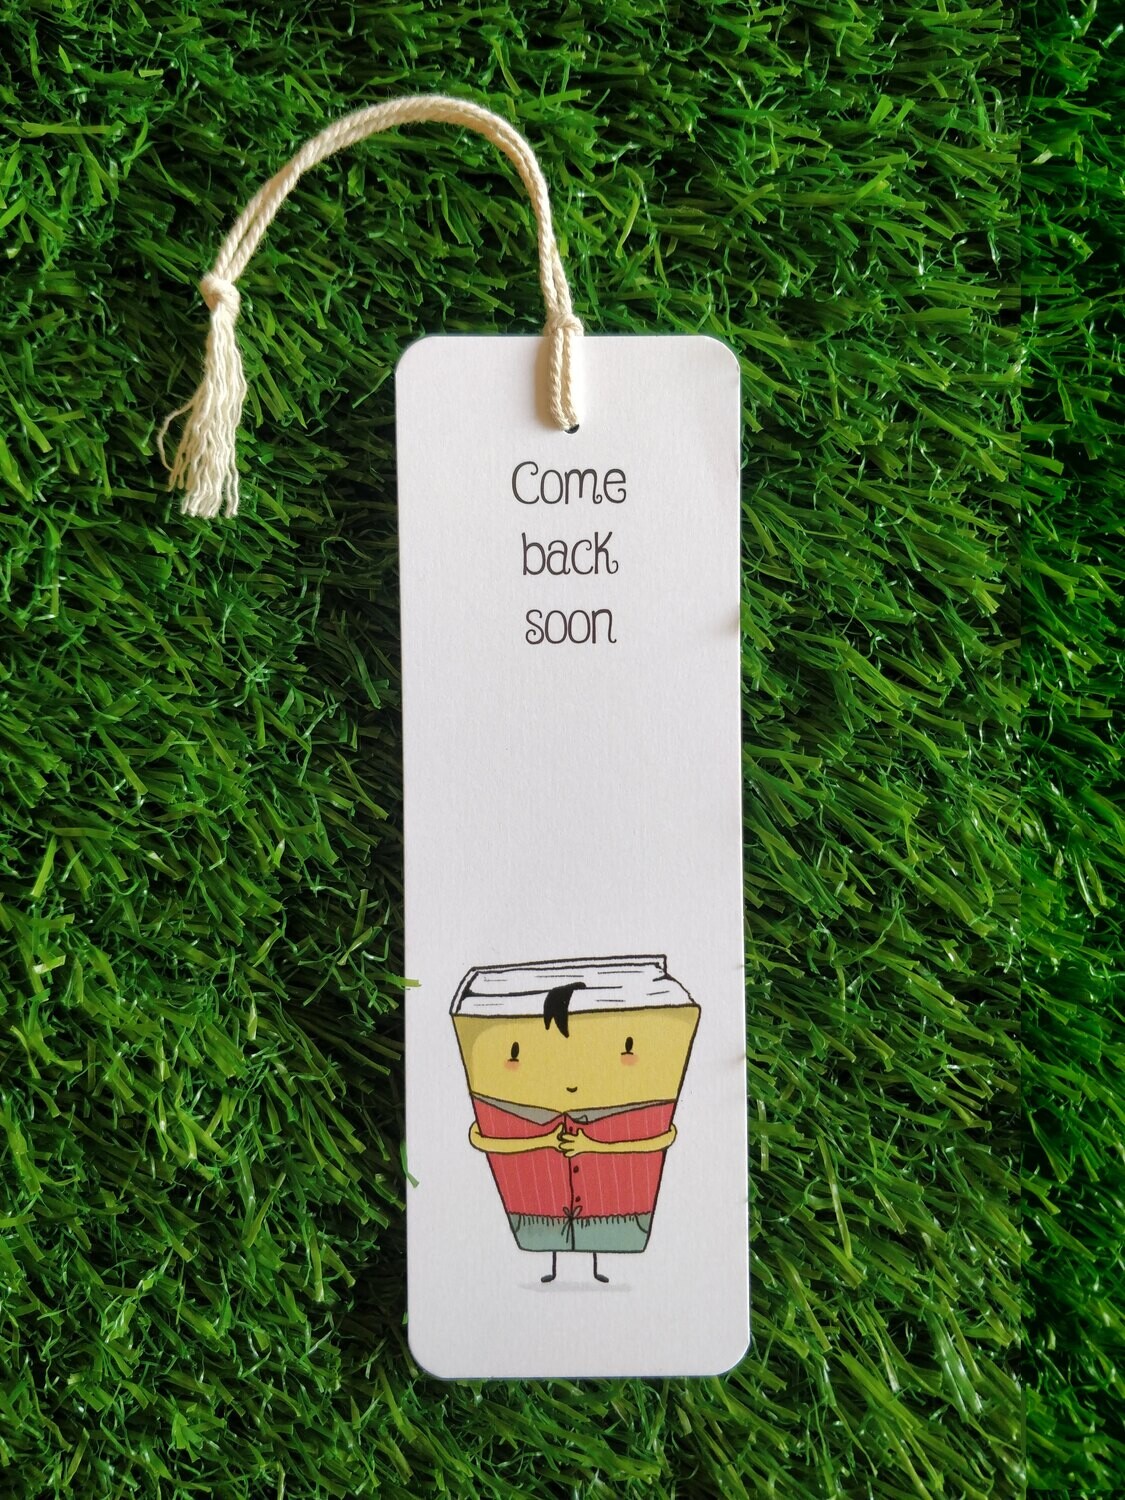 "Come back soon" - BOOKMARK